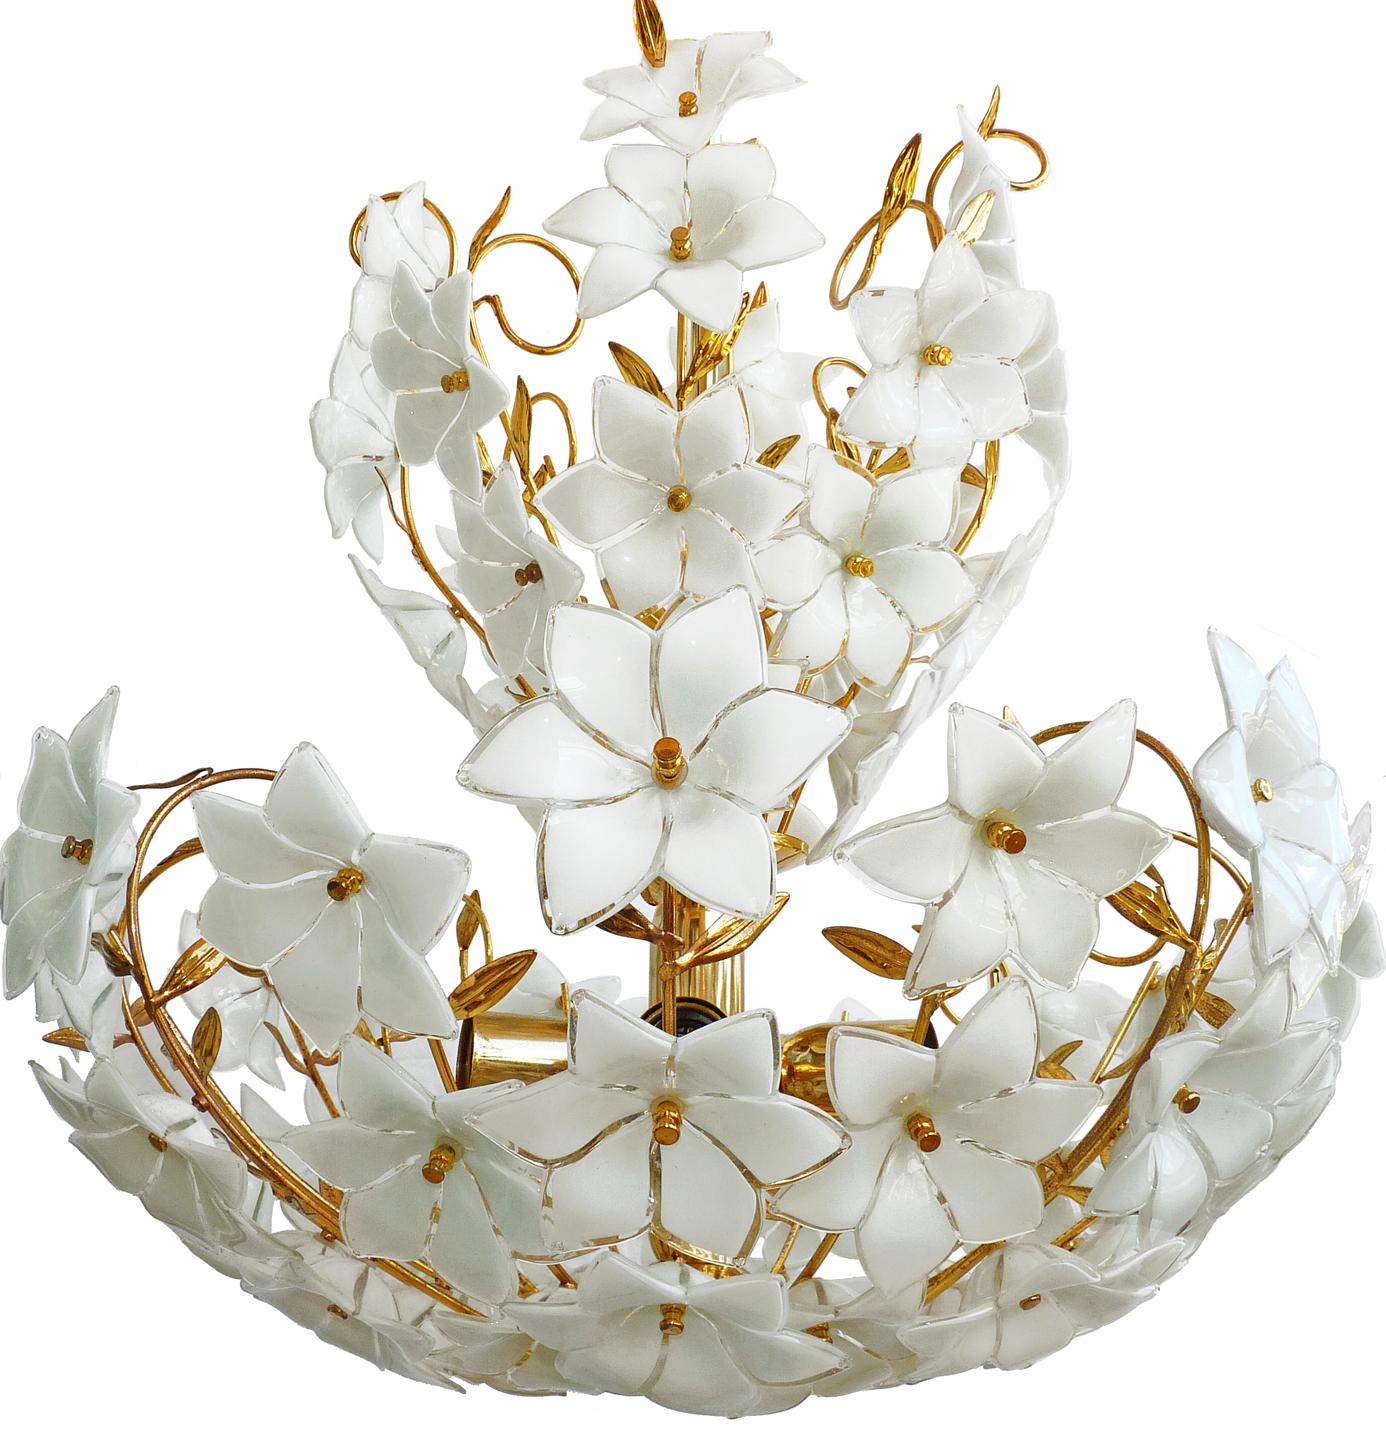 Large 1990s vintage midcentury Italian Murano flower bouquet attributed to Venini. Art glass with 72 hand blown white and clear glass flowers and gold-plated brass. Also have a matching pair.
Measures:
Diameter 24 in/ 60 cm
Height 36 in (chain=3.5